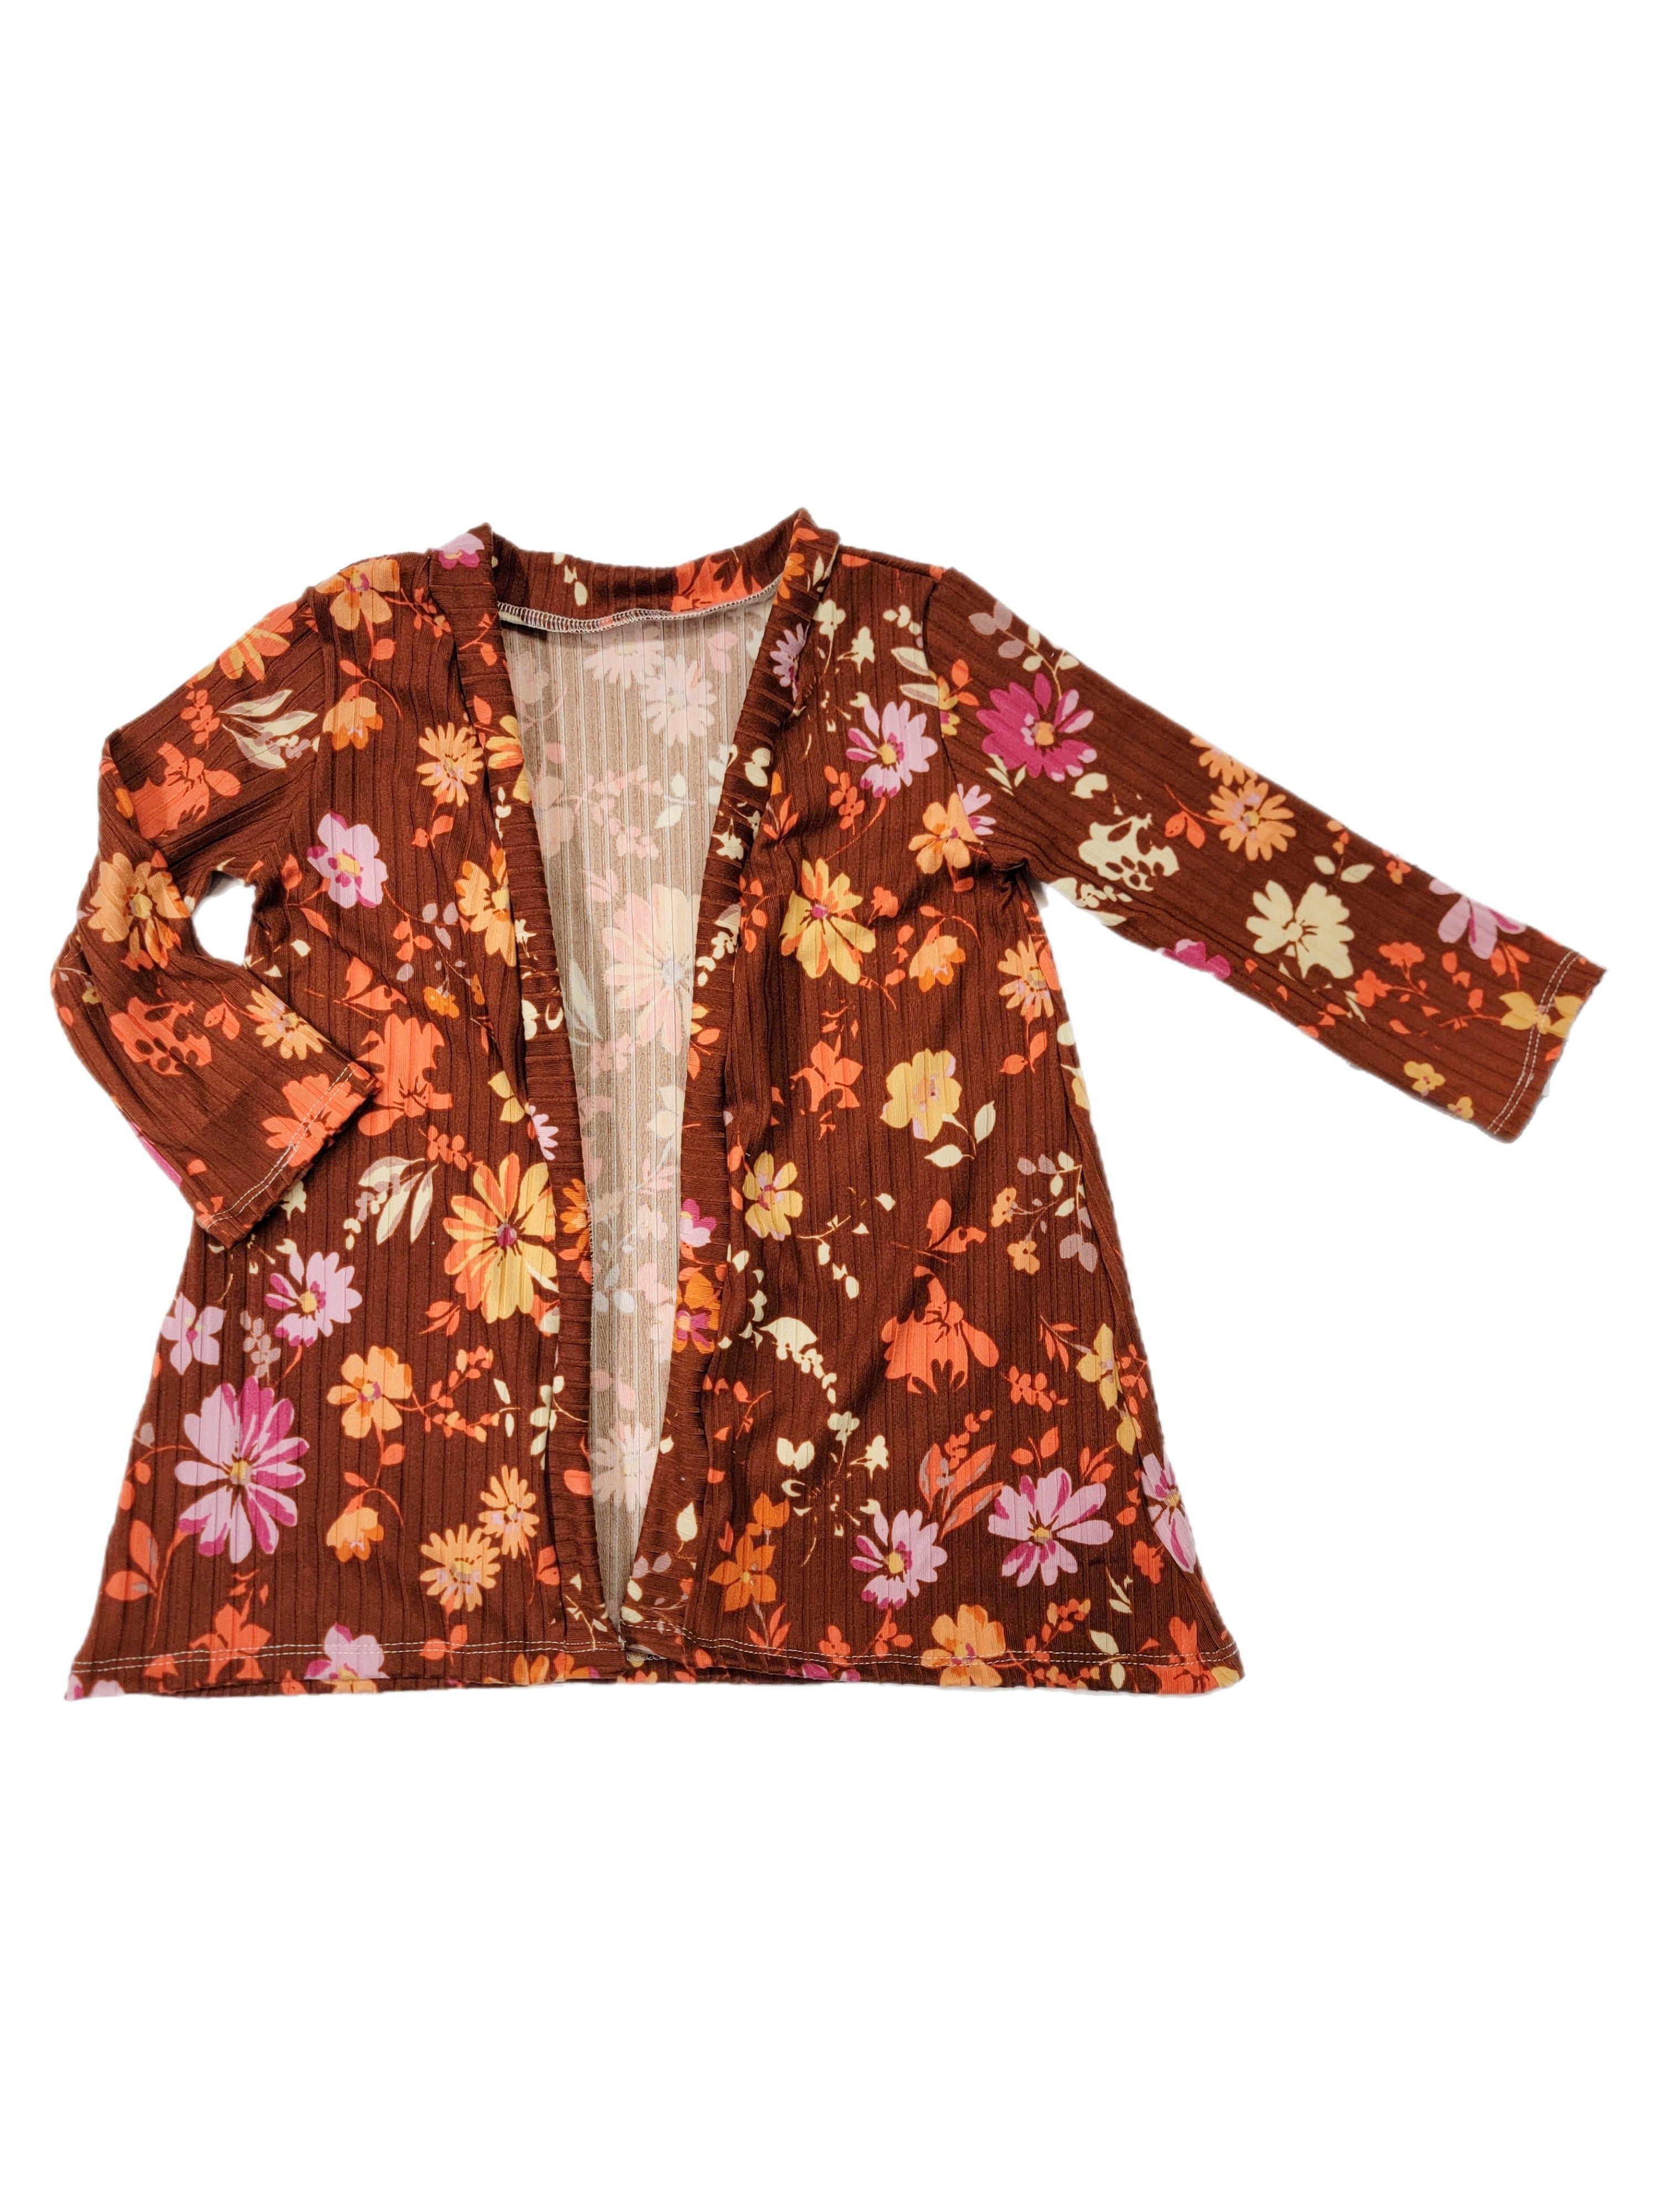 Fall Floral Duster/Cardigan Tunic Length 12-18 Months (READY TO SHIP)